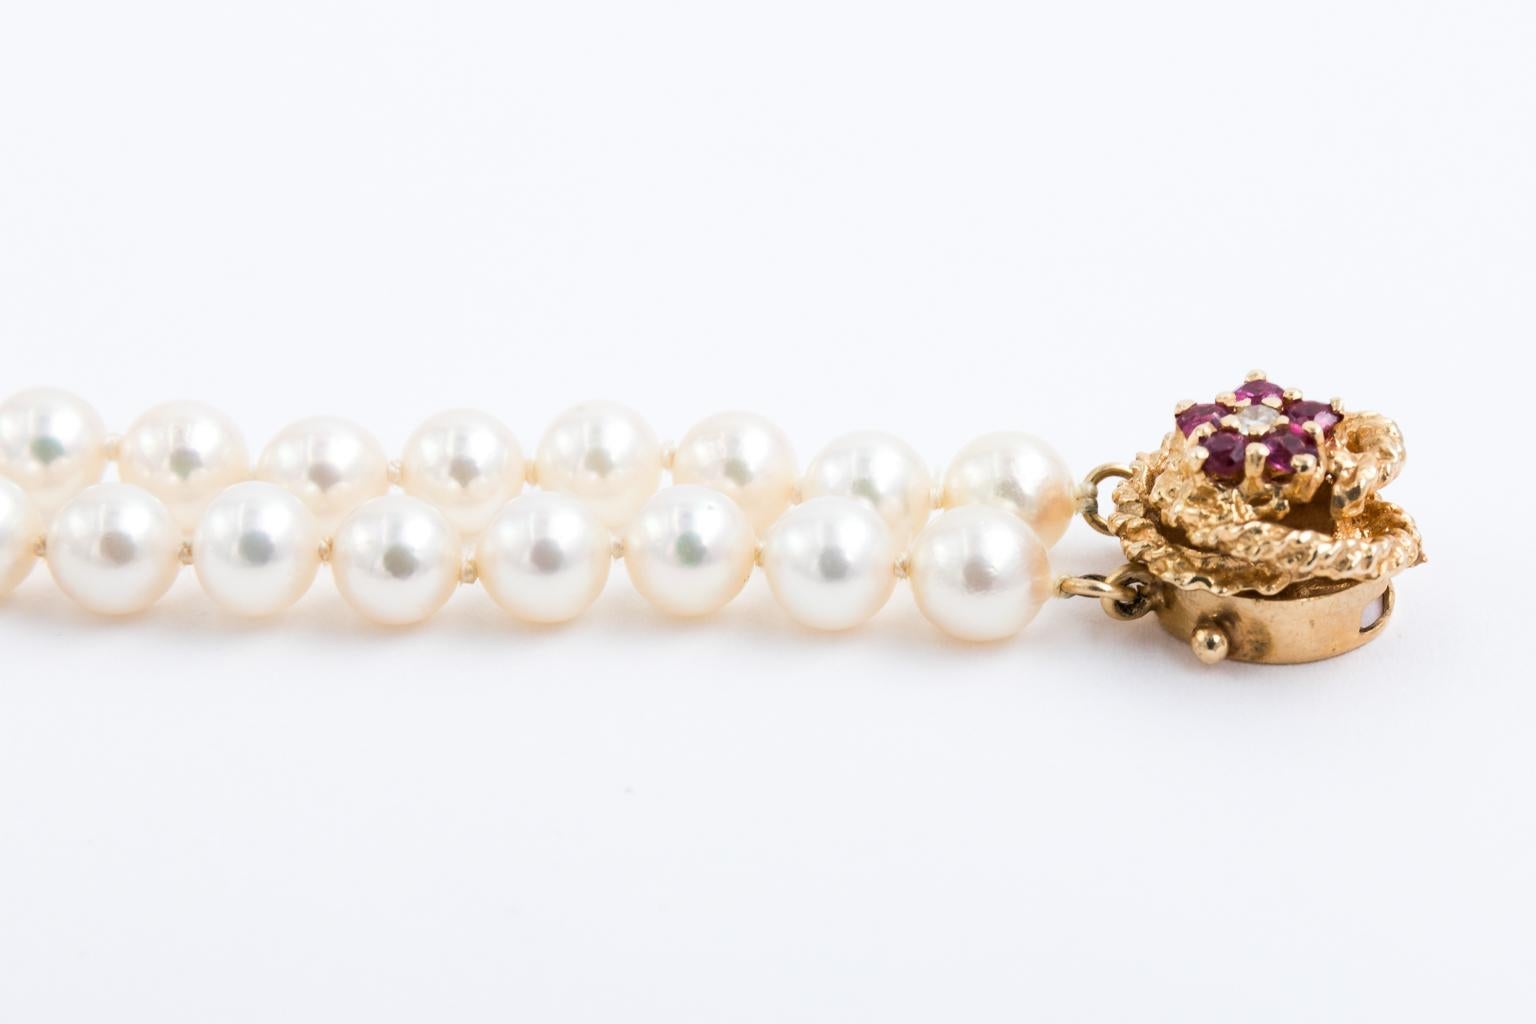 Circa 1960s double strand of 5-5.50 Millimeter Japanese cultured pearl necklace with 14 karat ruby and diamond clasp. The necklace consists of 135 pearls and 15 Inches long. The bracelet has 58 pearls and is seven inches long. The clasp also